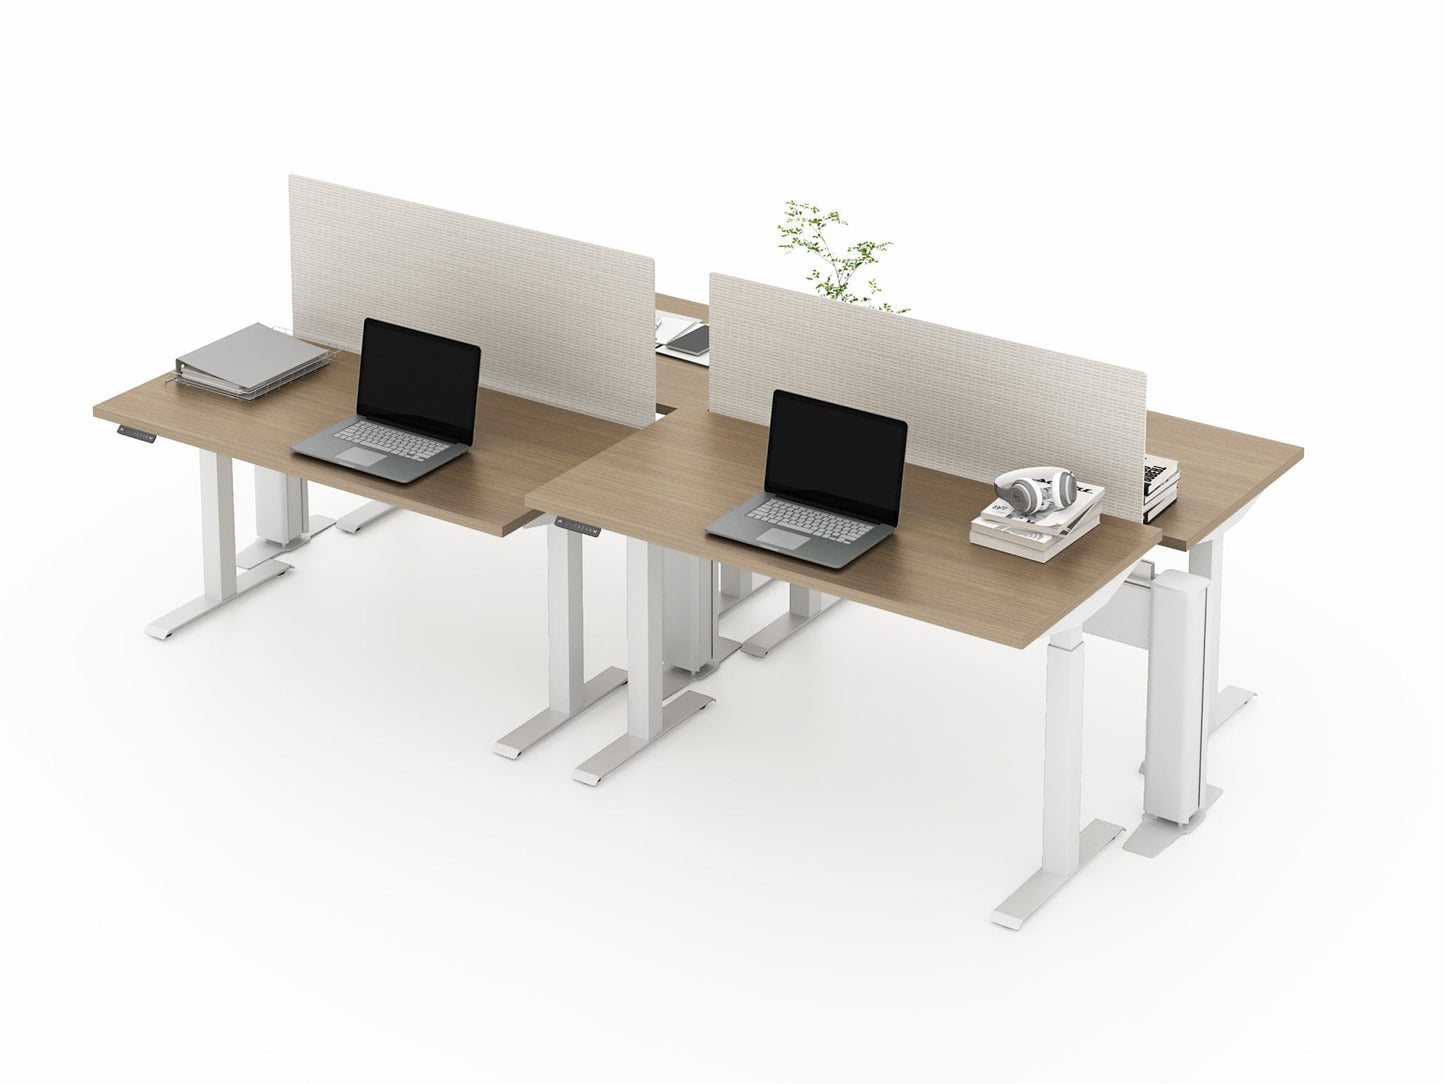 Load image into Gallery viewer, Beam Benching System w/ Sit Stand by Friant (4 pack, 72x30) - Wholesale Office Furniture
